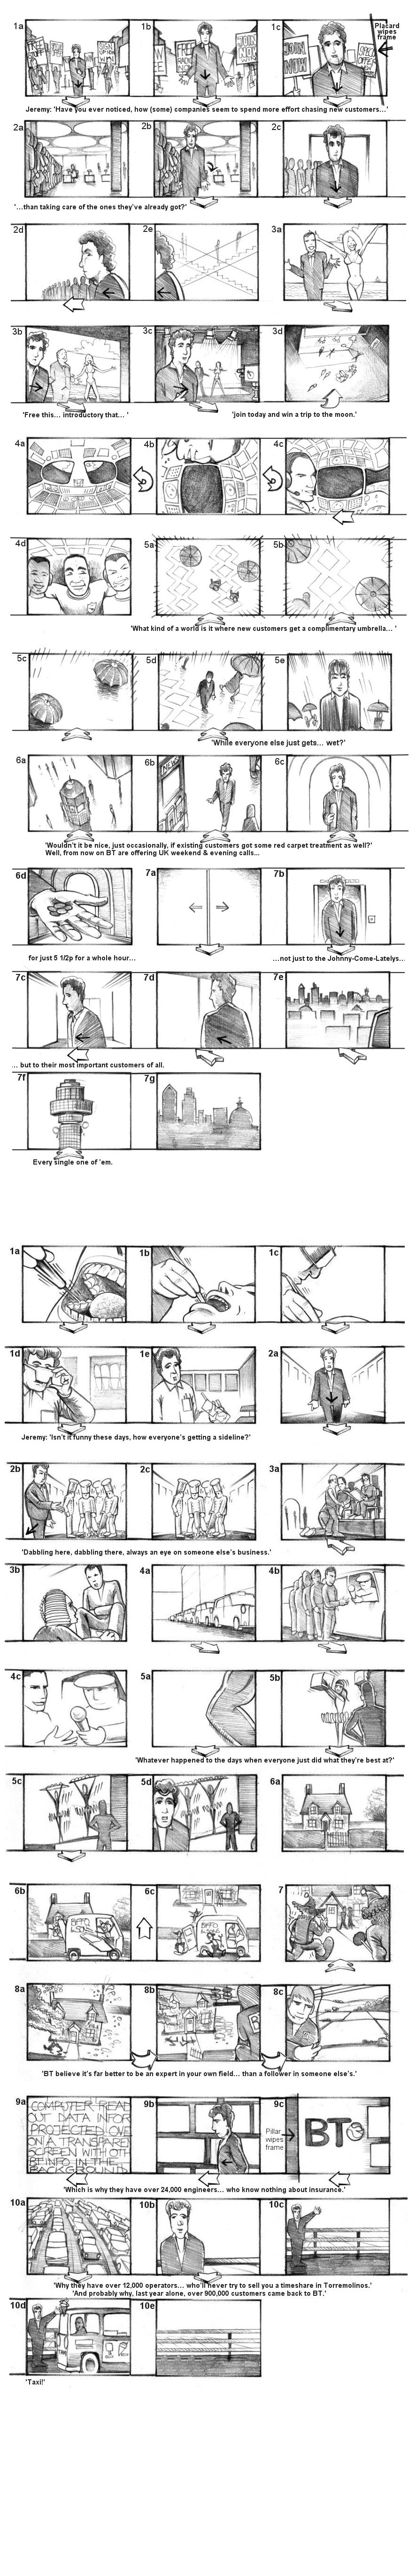 BT 'LOYALTY' STORYBOARDS BY ANDY SPARROW